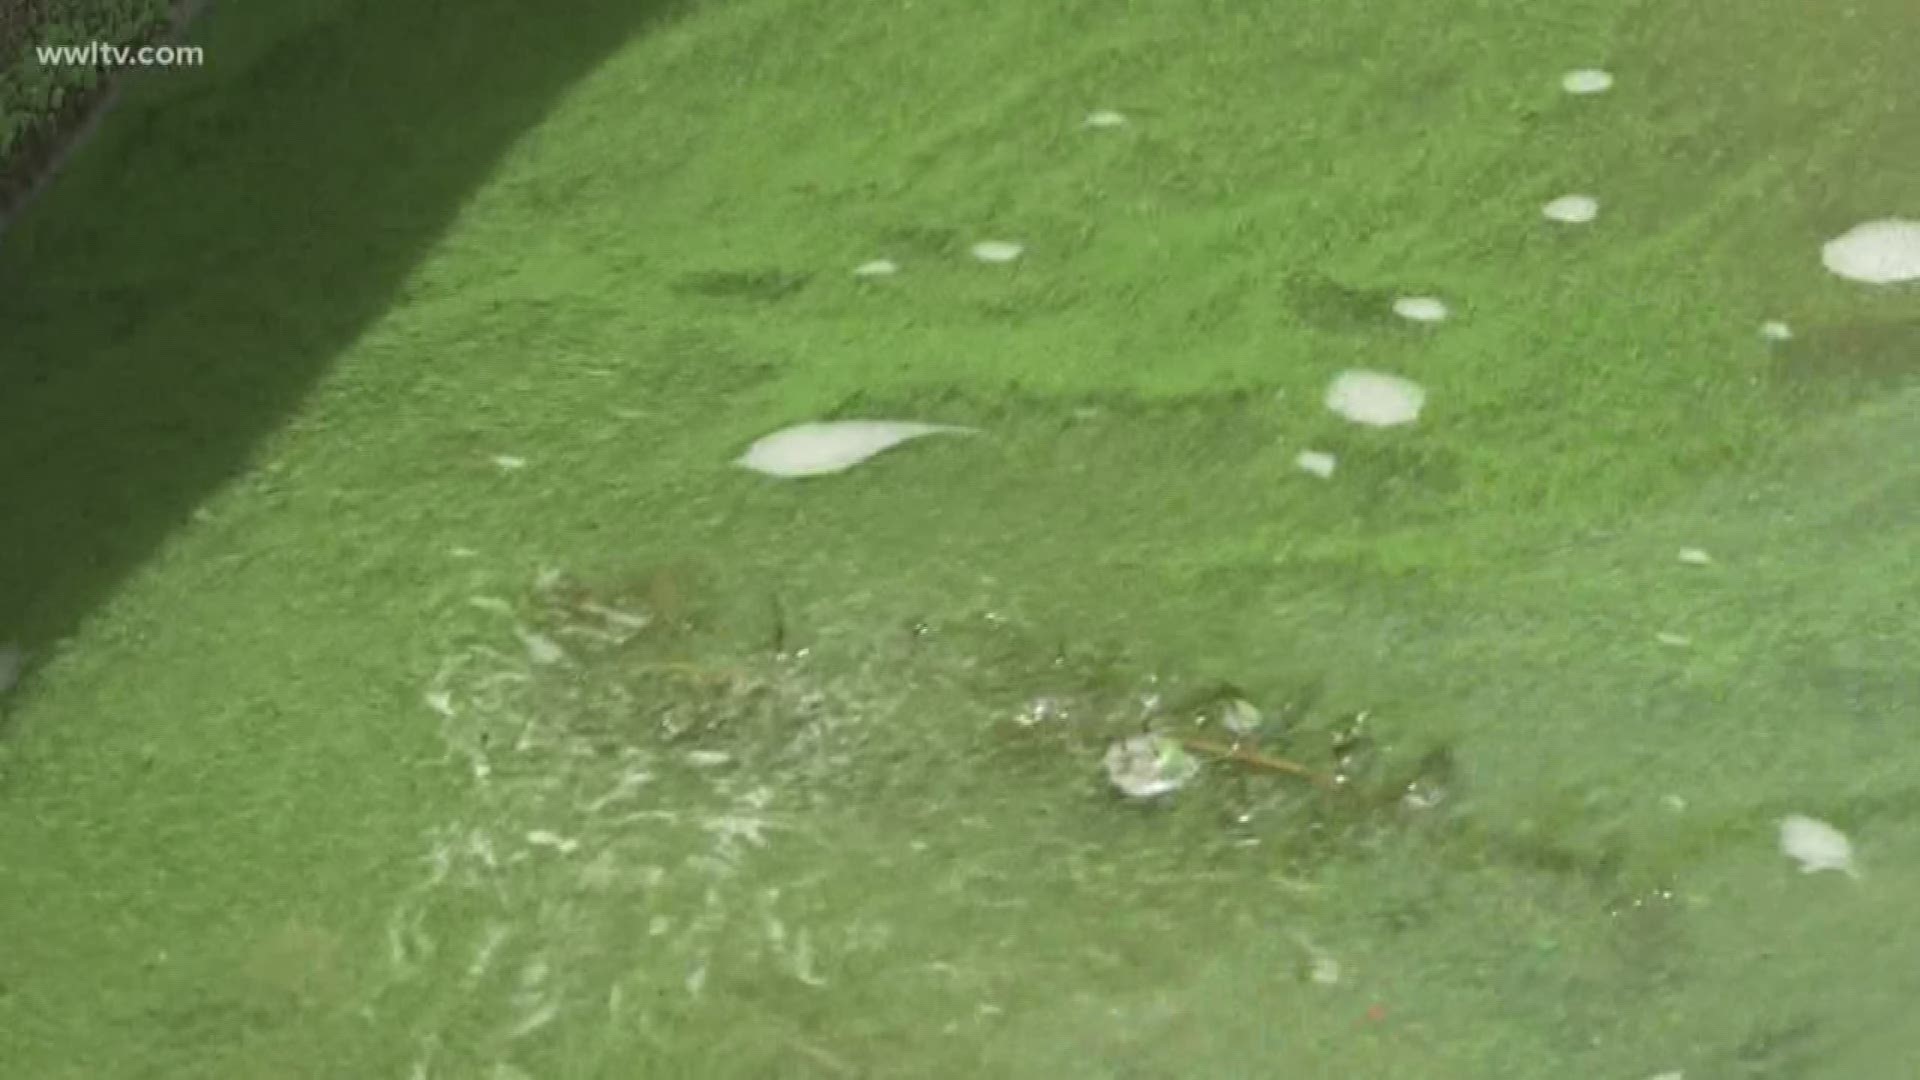 All of Mississippi's Gulf Coast beaches have been closed to swimmers due to an algae bloom connected to the opening of the Bonnet Carre Spillway.